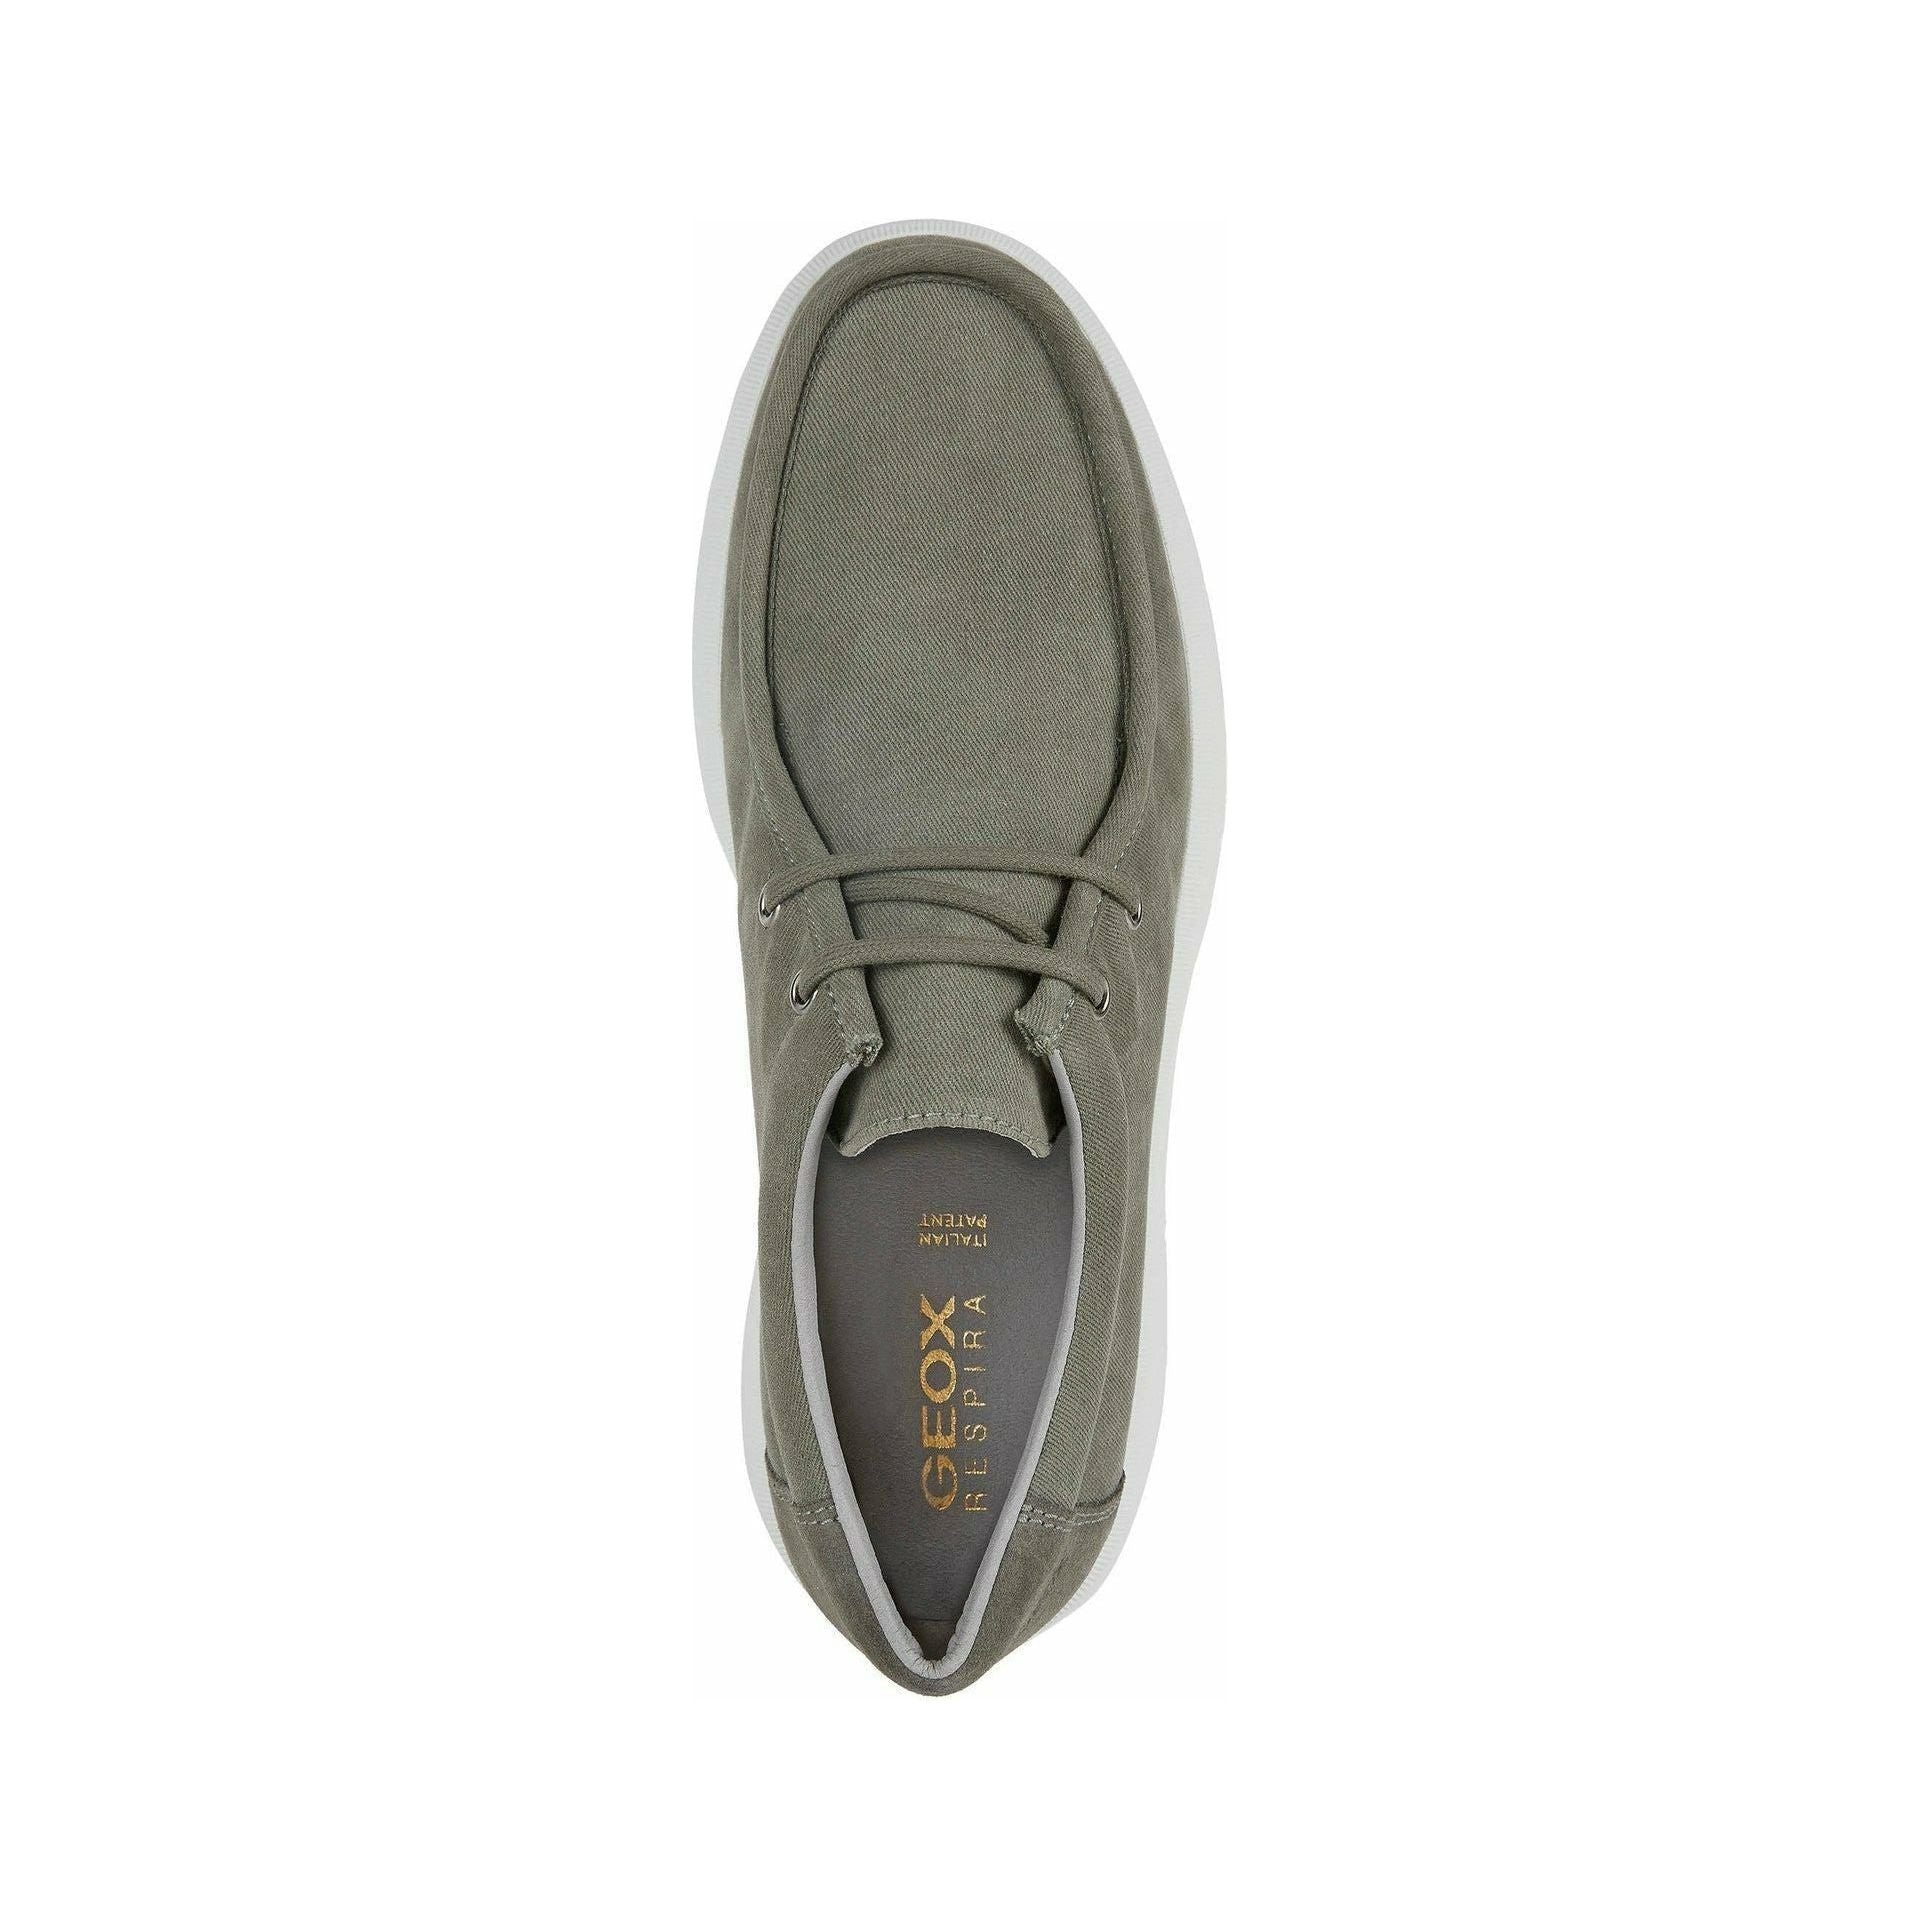 Geox Errico - Men's Canvas Lace Shoe in Olive | Geox Shoes | Wisemans | Bantry | West Cork | Munster | Ireland